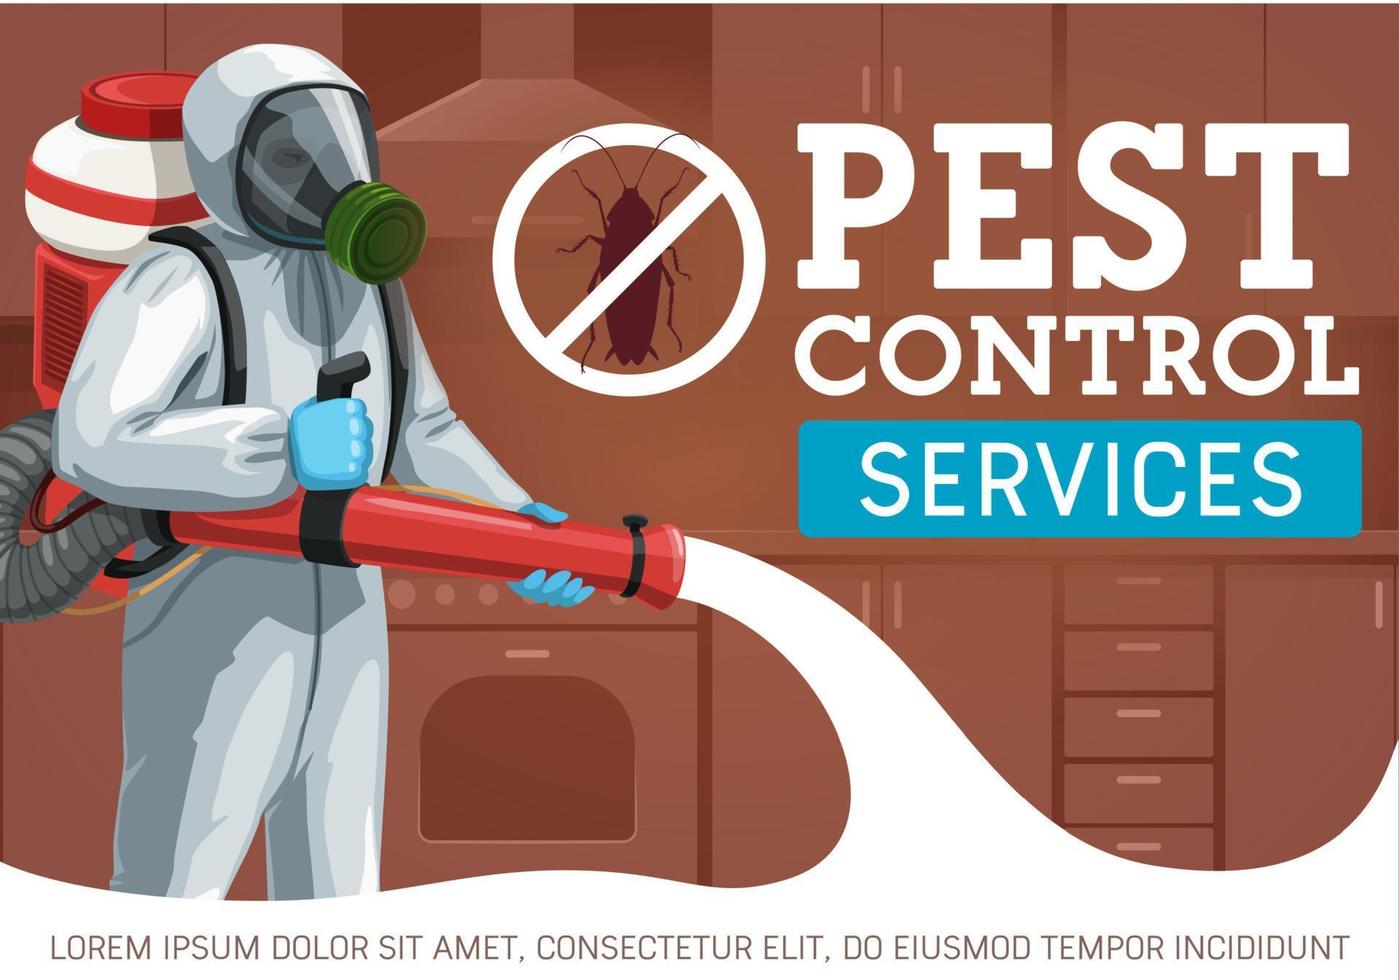 verdelger sproeien insecticide. plaag controle vector